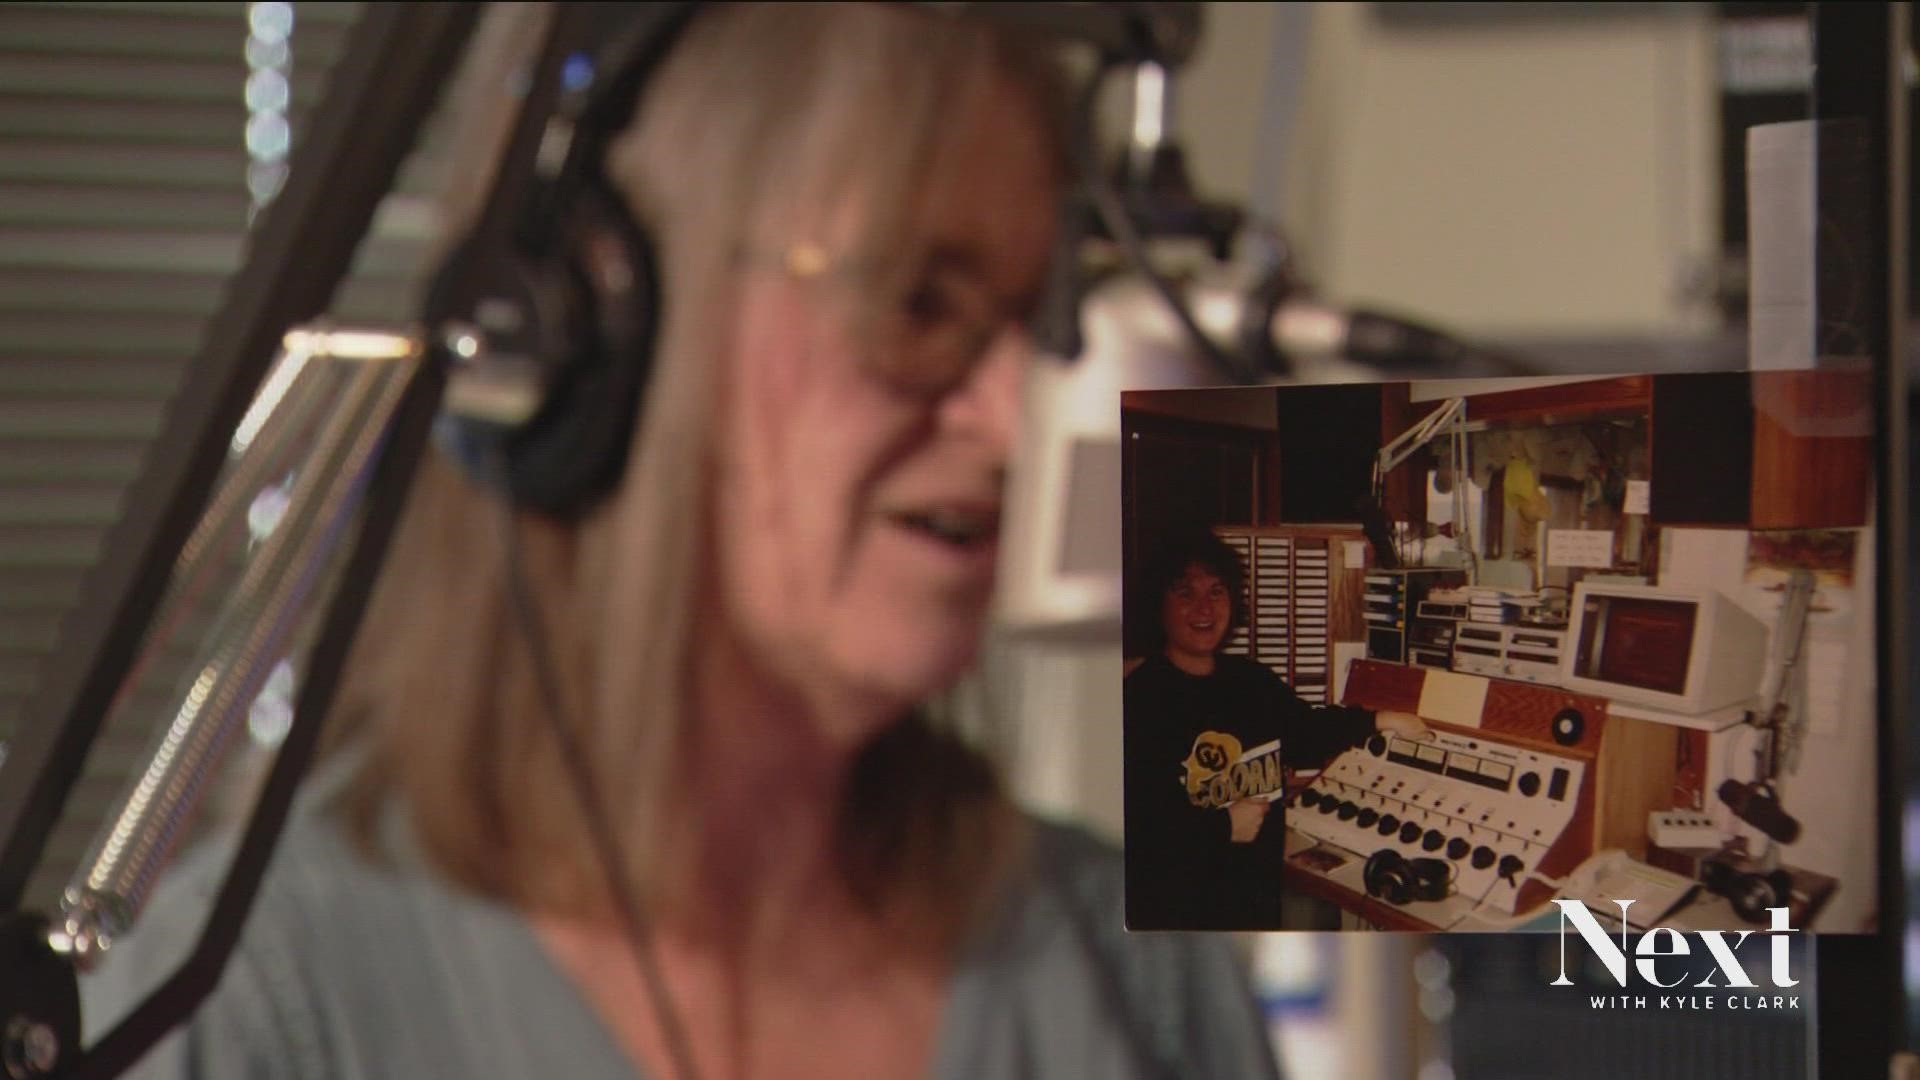 Ginger Lee Havlat has made listeners smile for about 2,000 Fridays. She's dropping the mic after close to four decades on air at KBCO and let us share it with you.